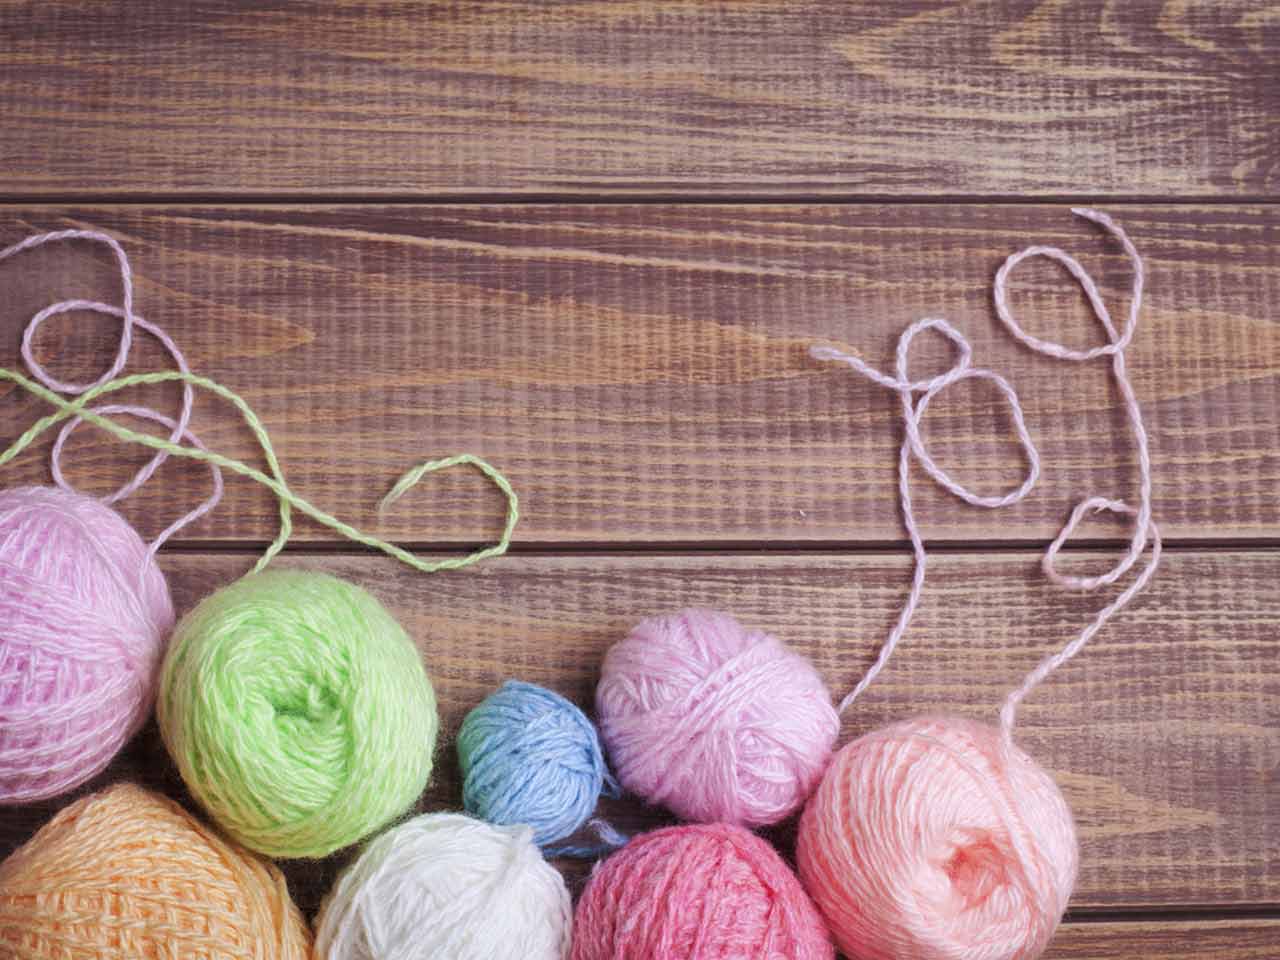 Sewing and knitting for charity - how you can help - Saga